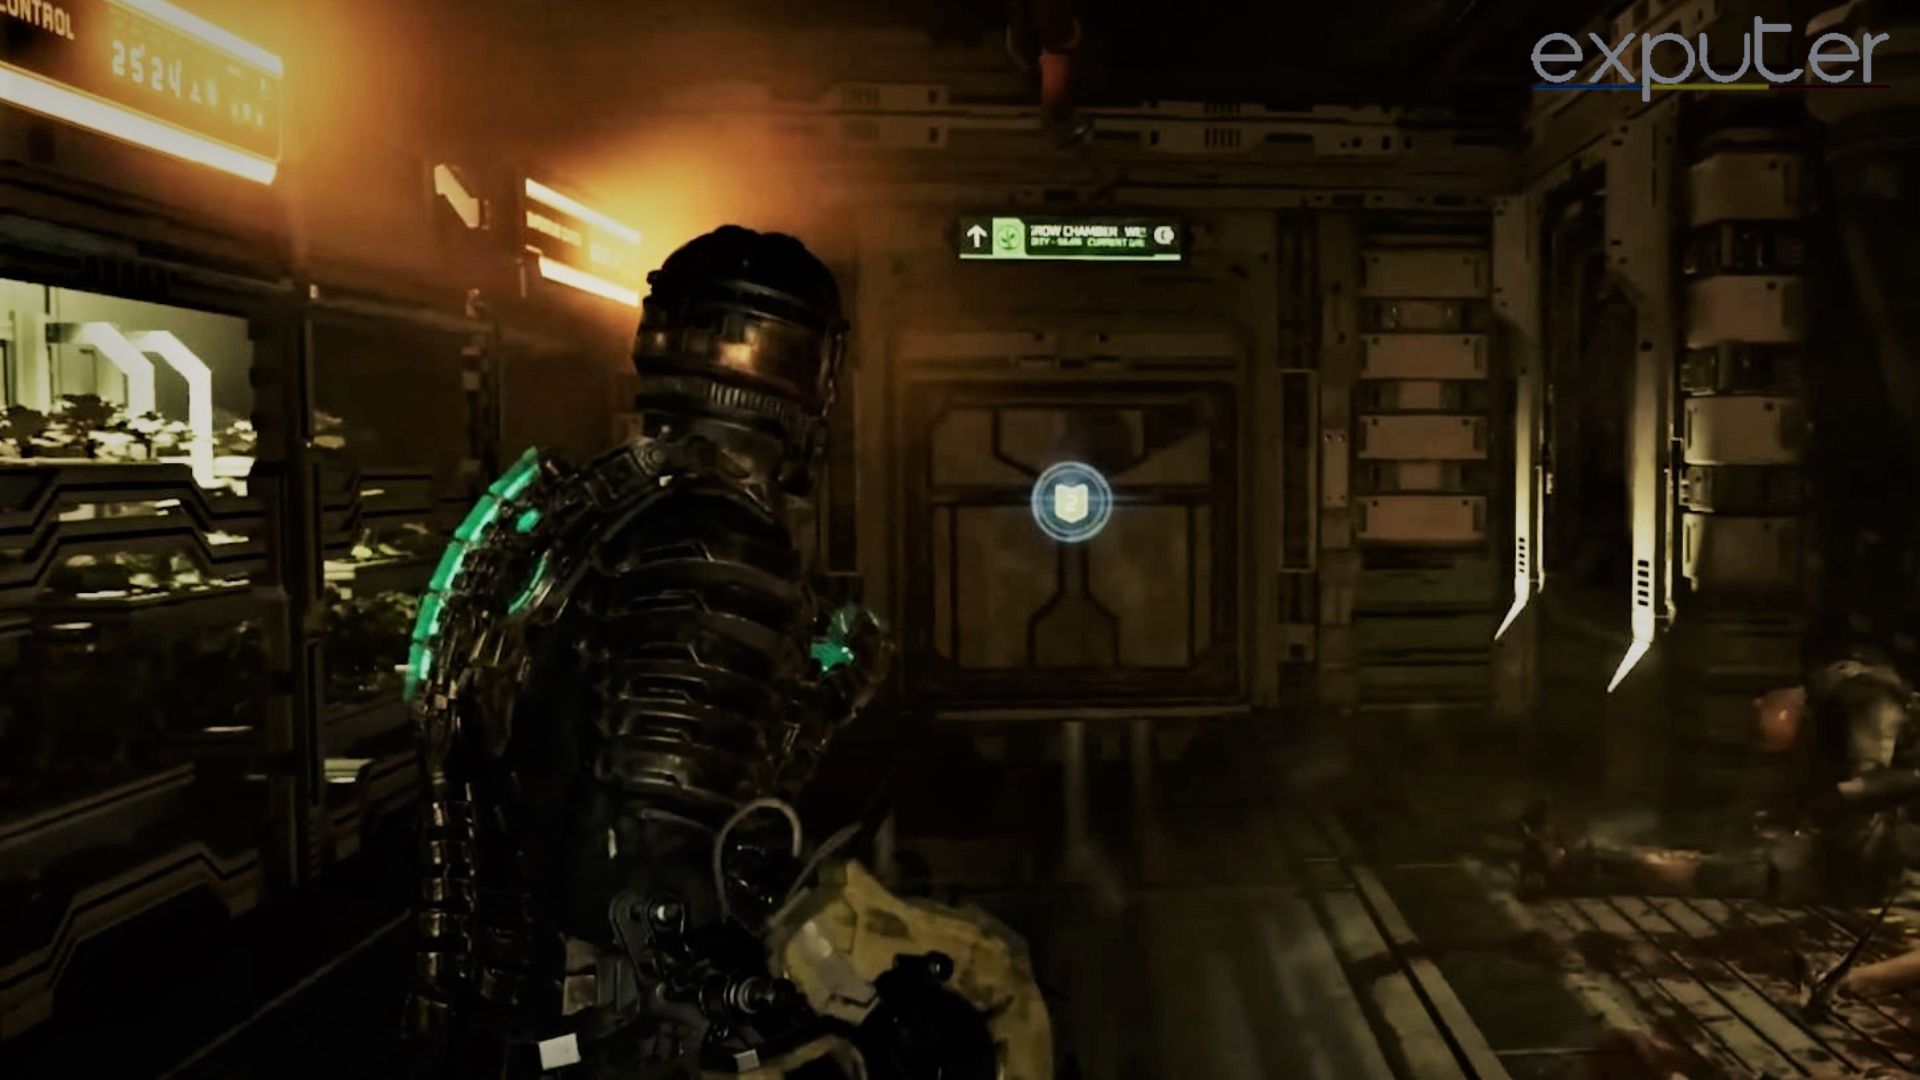 force gun stategy in dead space remake 